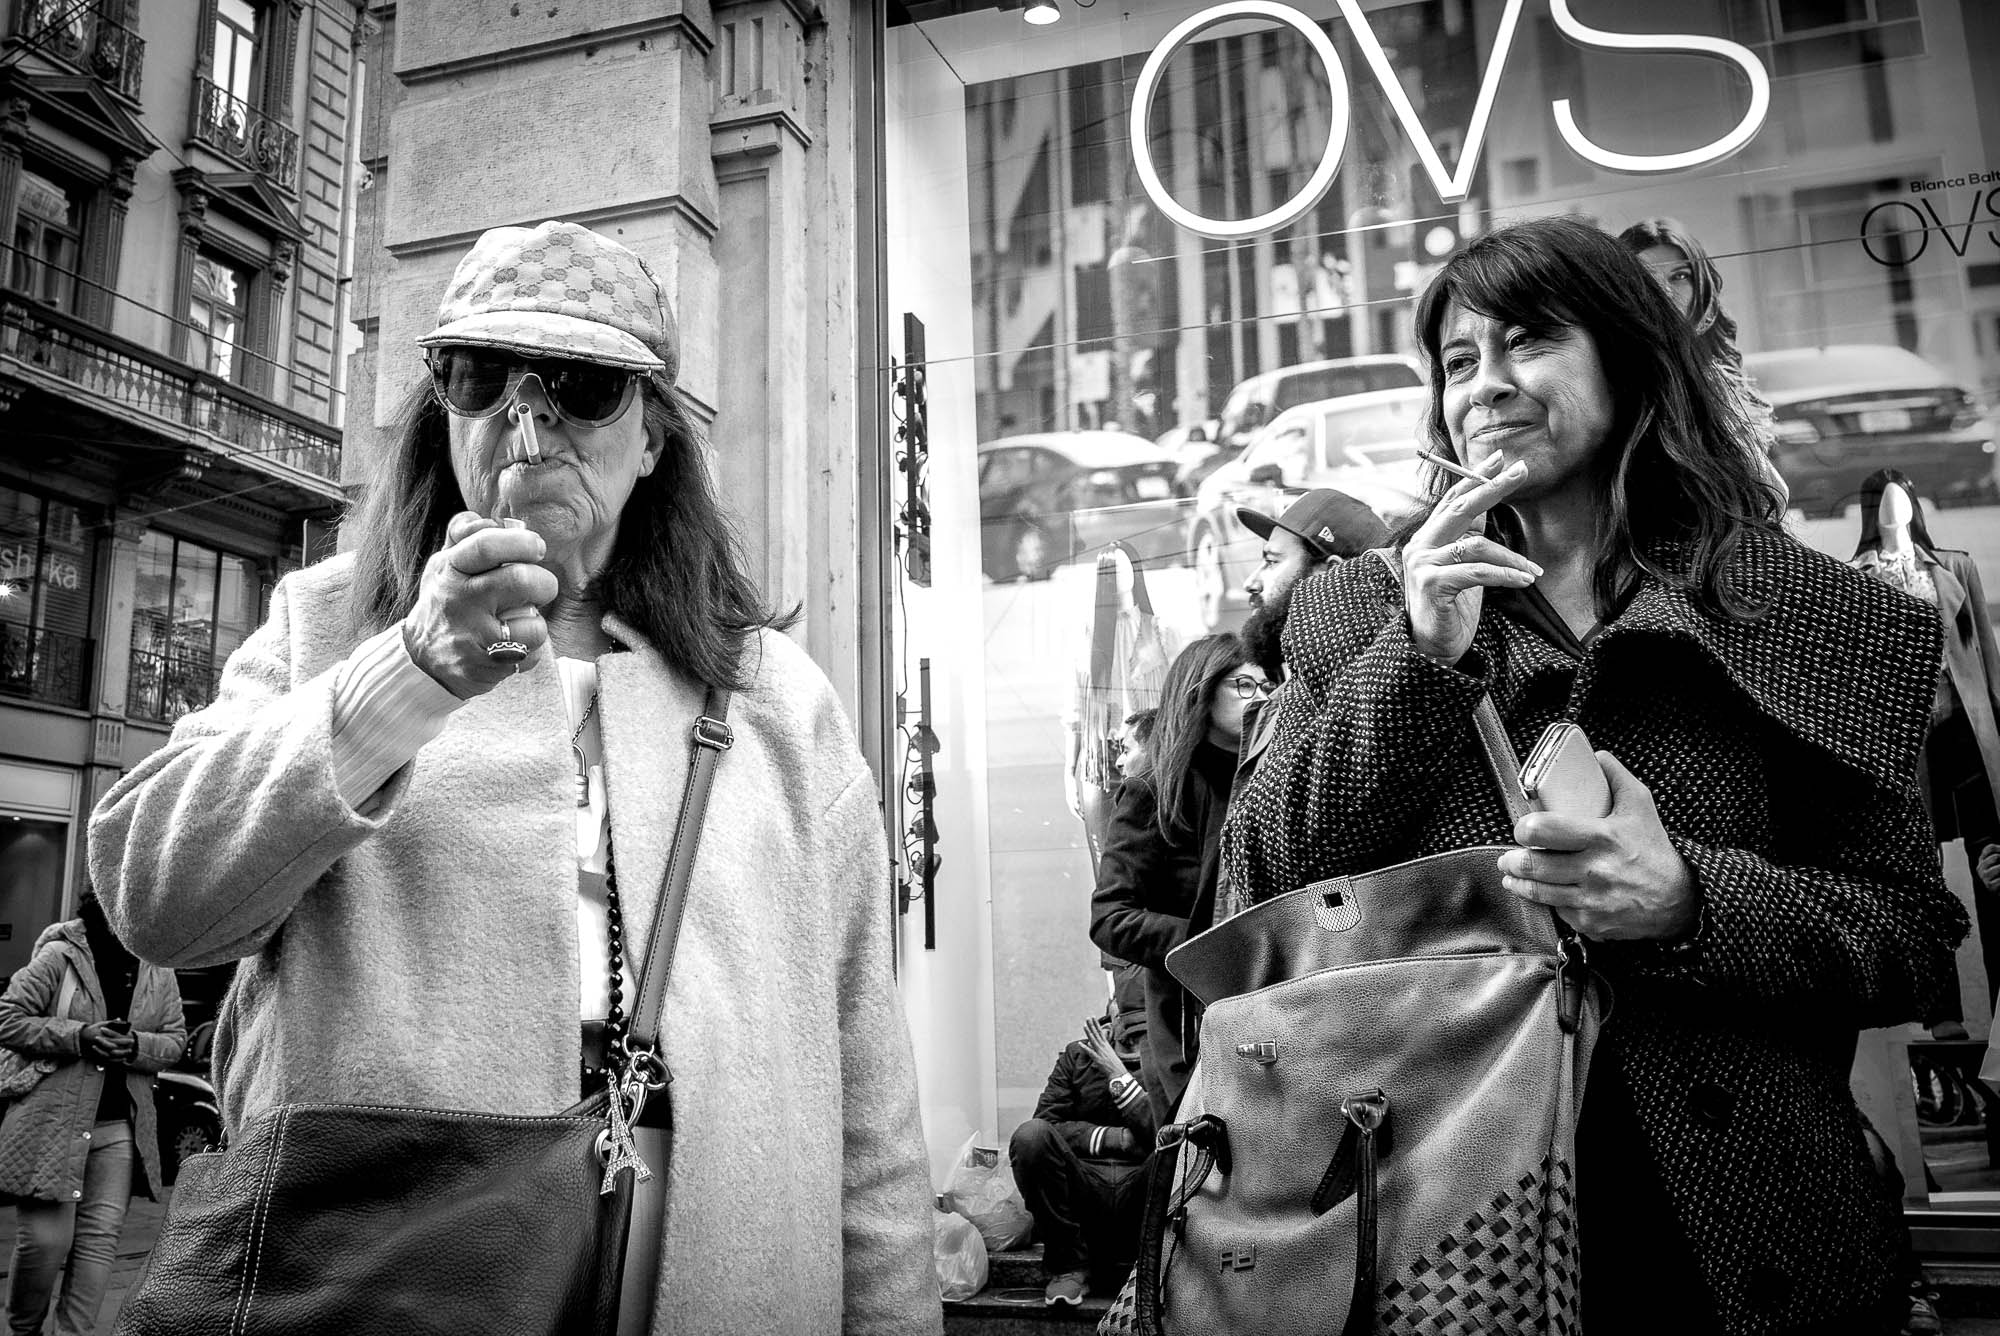 Summicron-M 1:2/28 ASPH. sample photo. The smokers photography